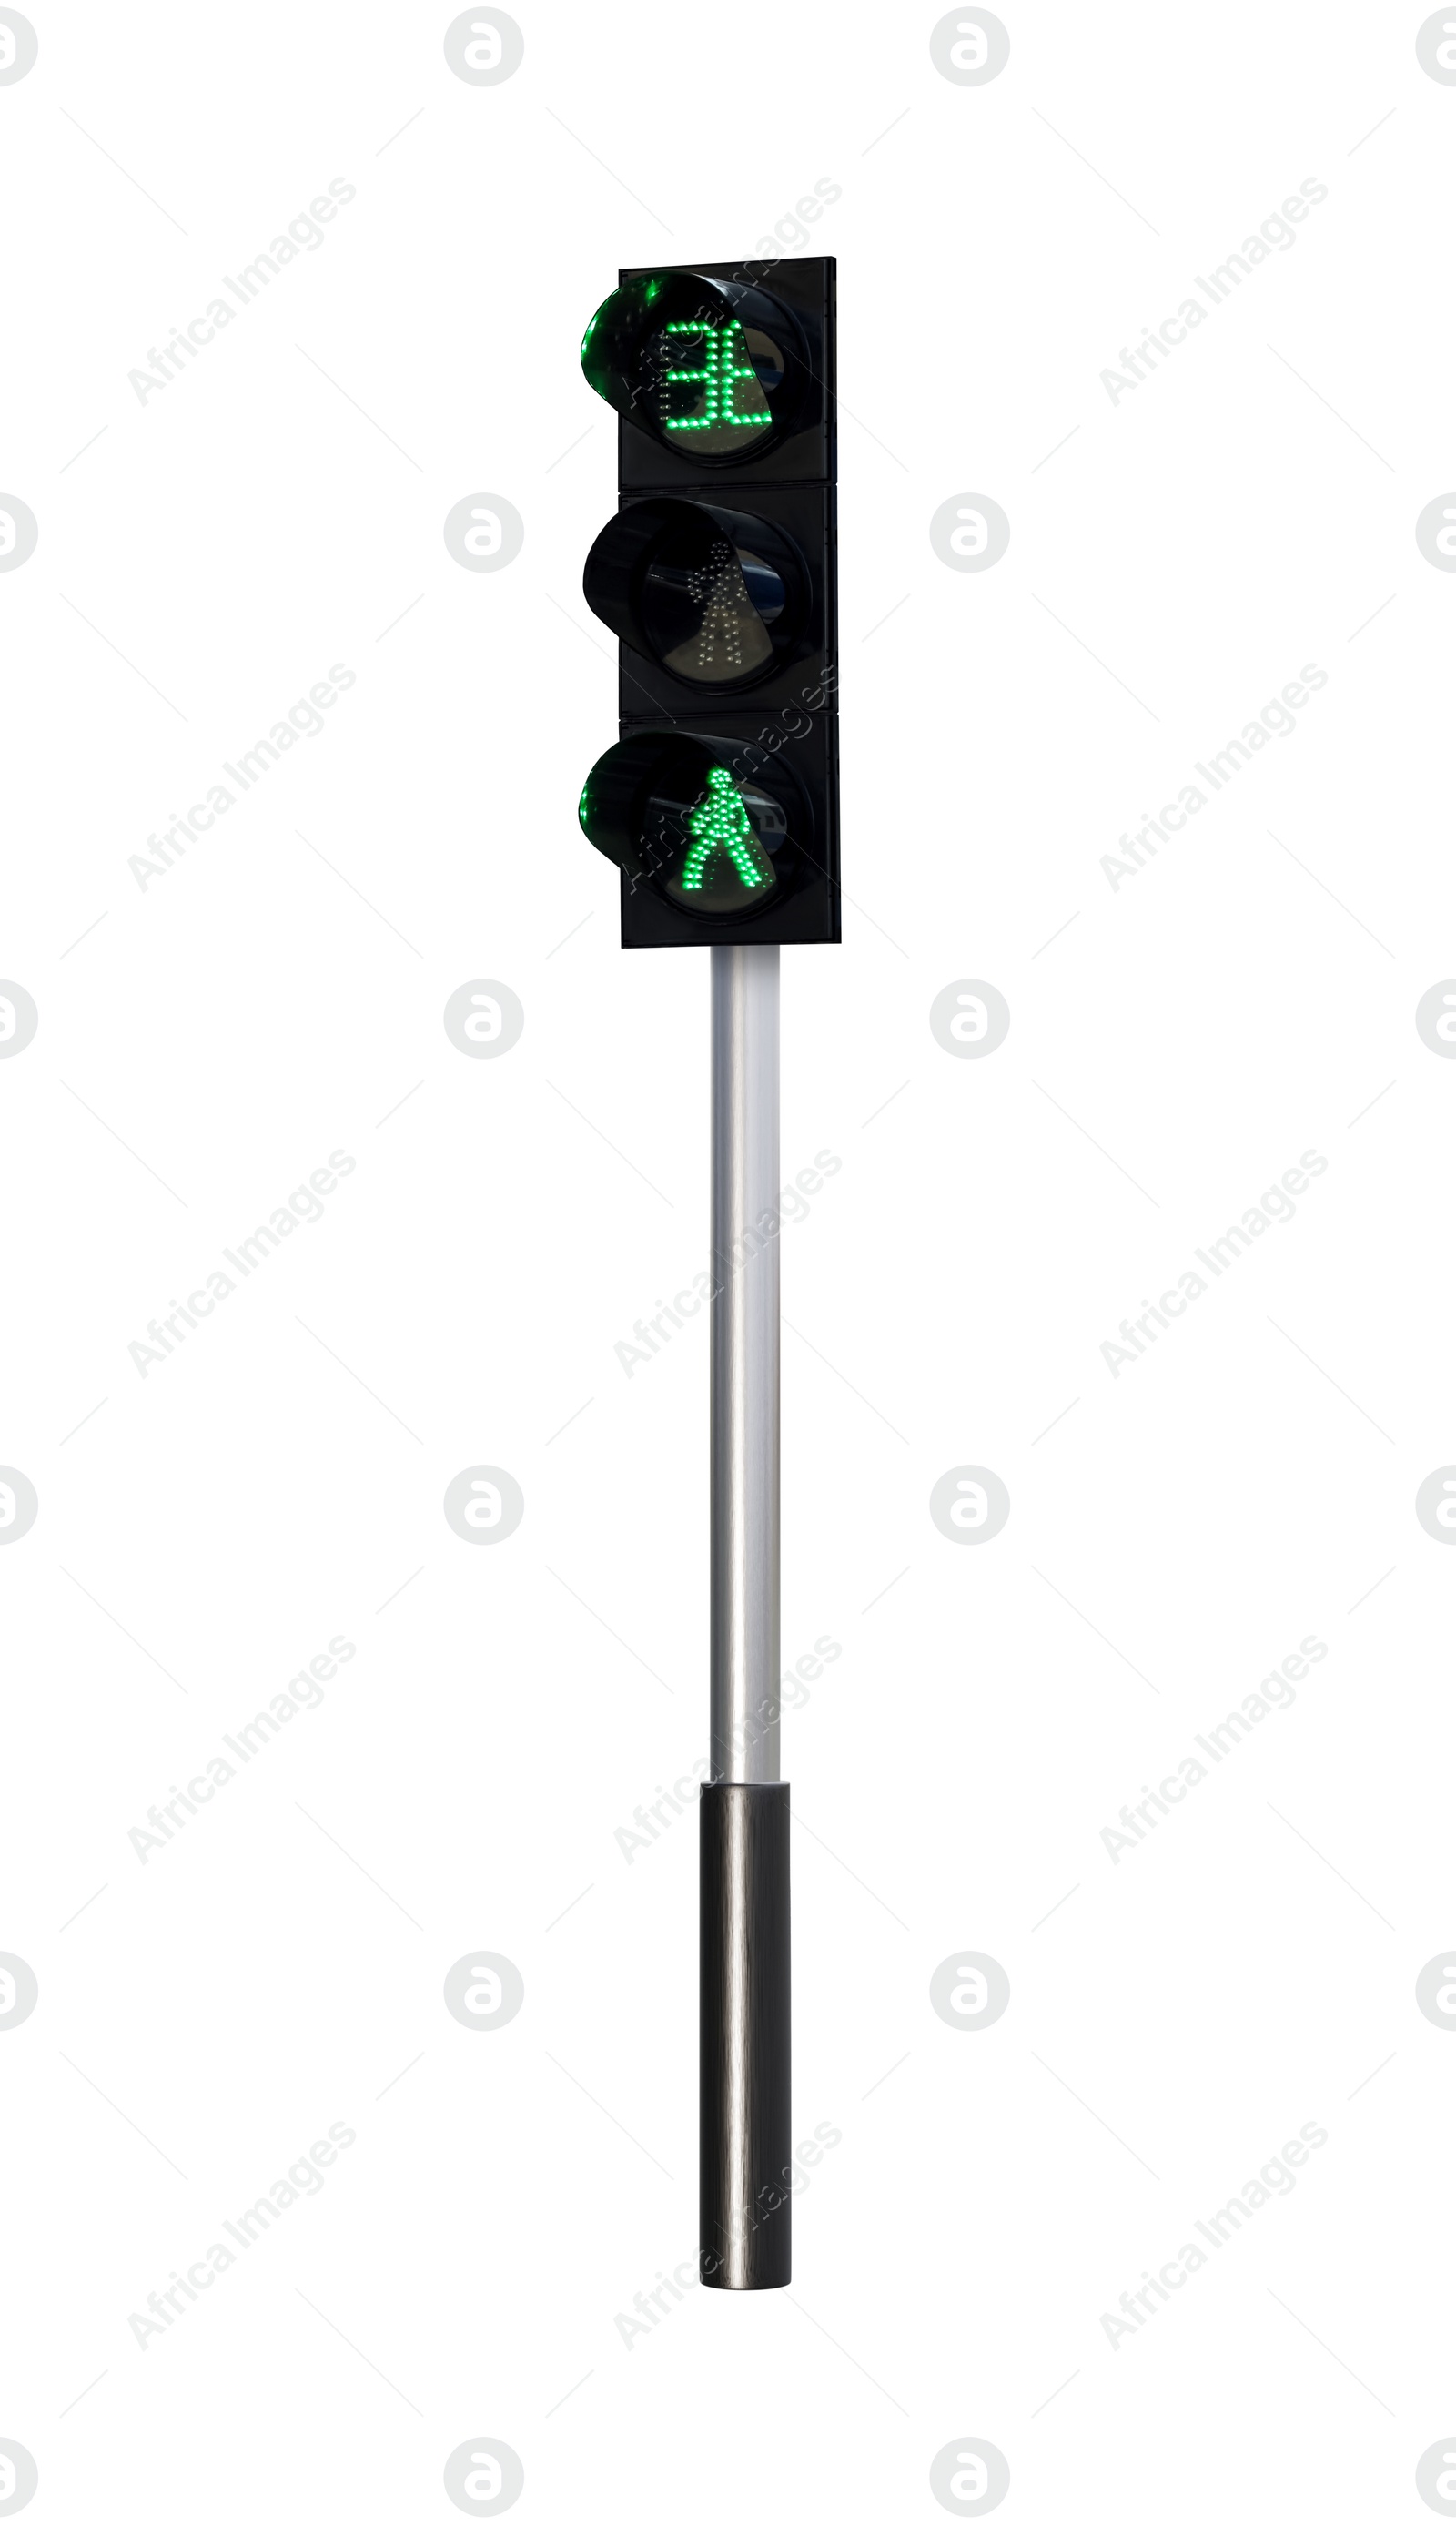 Image of Traffic light with pedestrian signals and pole on white background